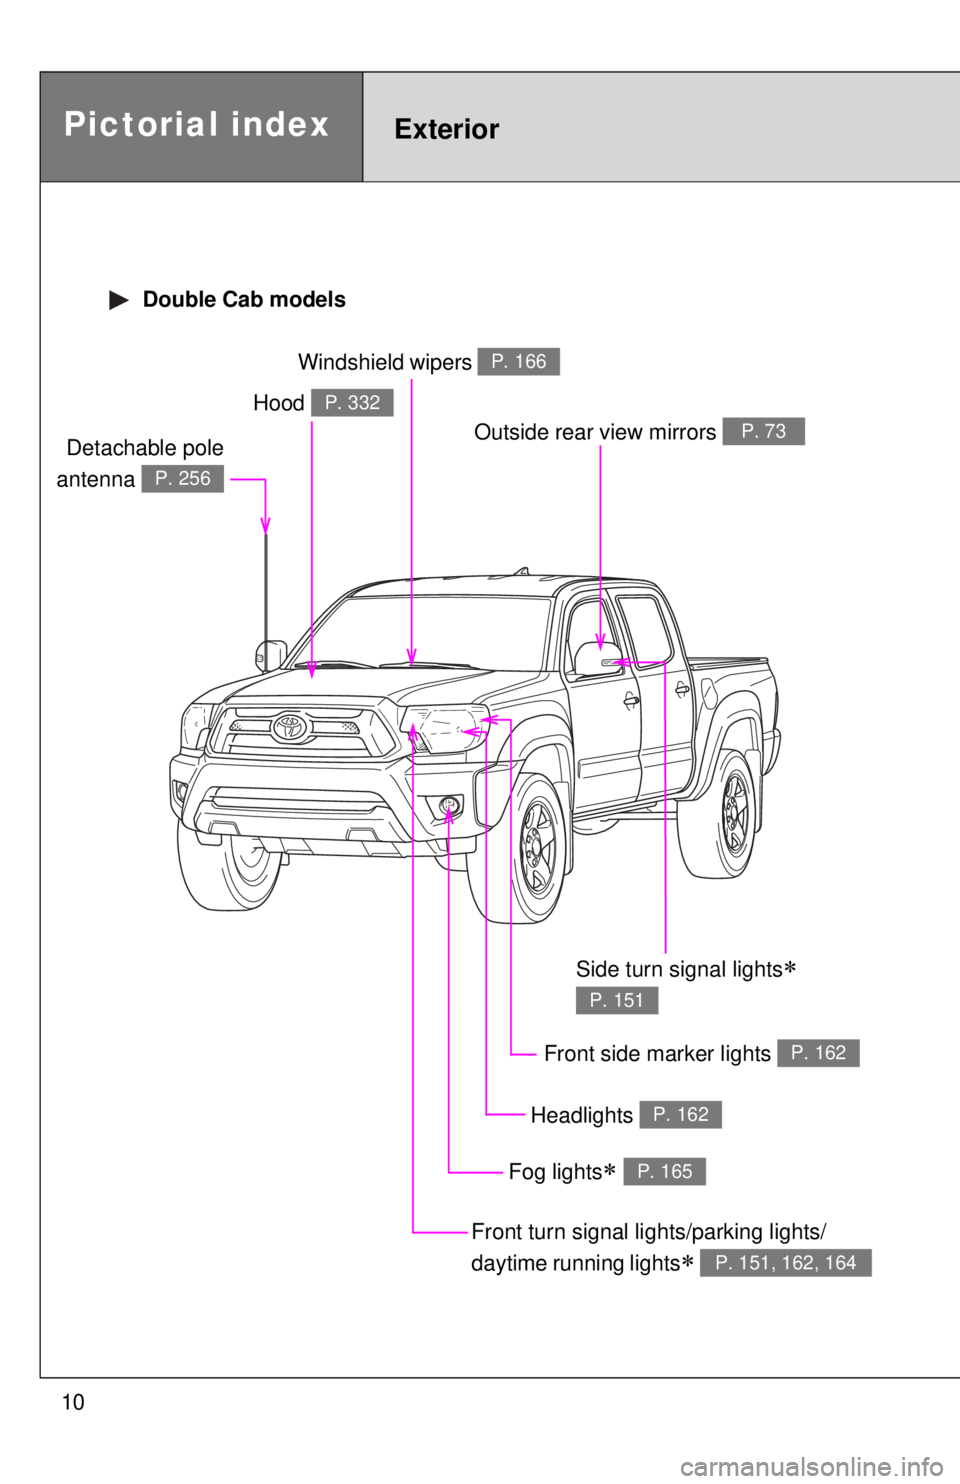 TOYOTA TACOMA 2013  Owners Manual (in English) 10
Pictorial indexExterior
 Double Cab models
Headlights P. 162
Hood P. 332
Windshield wipers P. 166
Front side marker lights P. 162
Outside rear view mirrors P. 73
Front turn signal lights/parking li